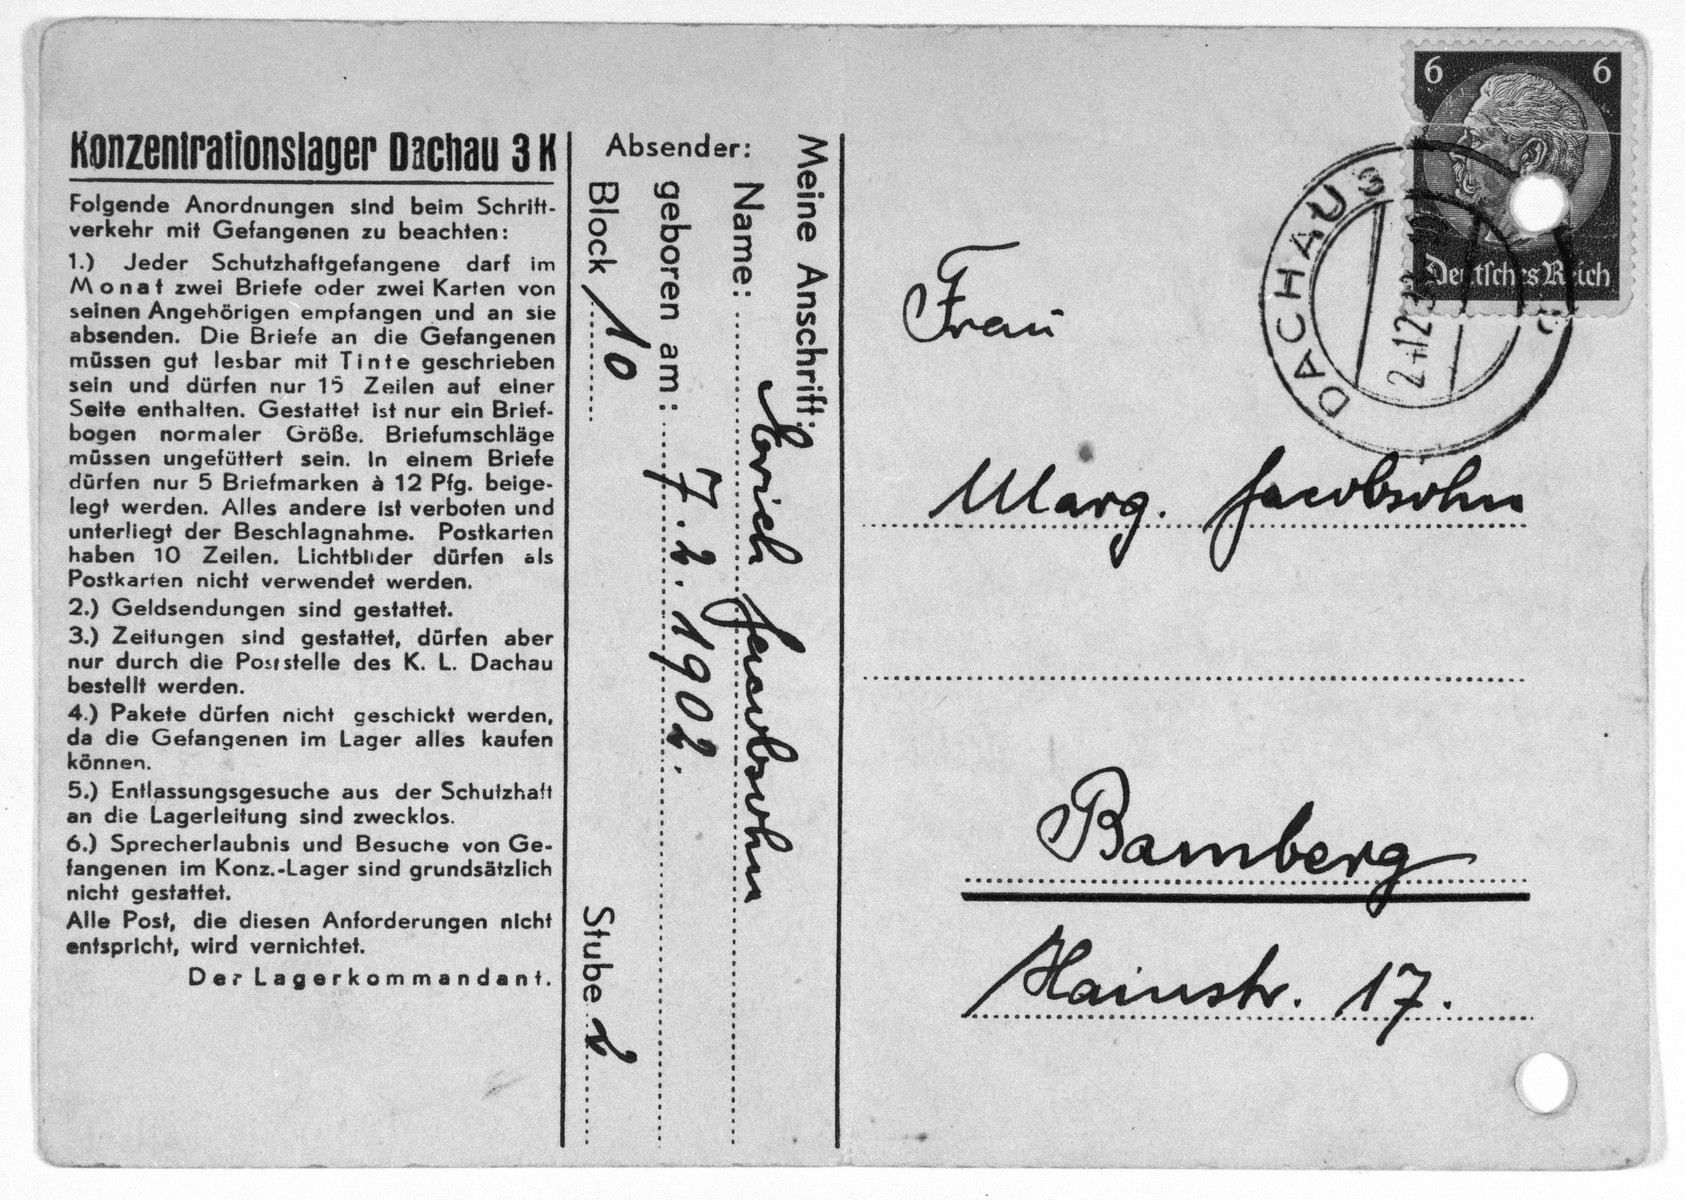 Postcard sent from the Dachau concentration camp by Jewish prisoner, Erich Jacobsohn, to his wife Margarete in Bamberg.

The postcard is dated December 17, 1938.